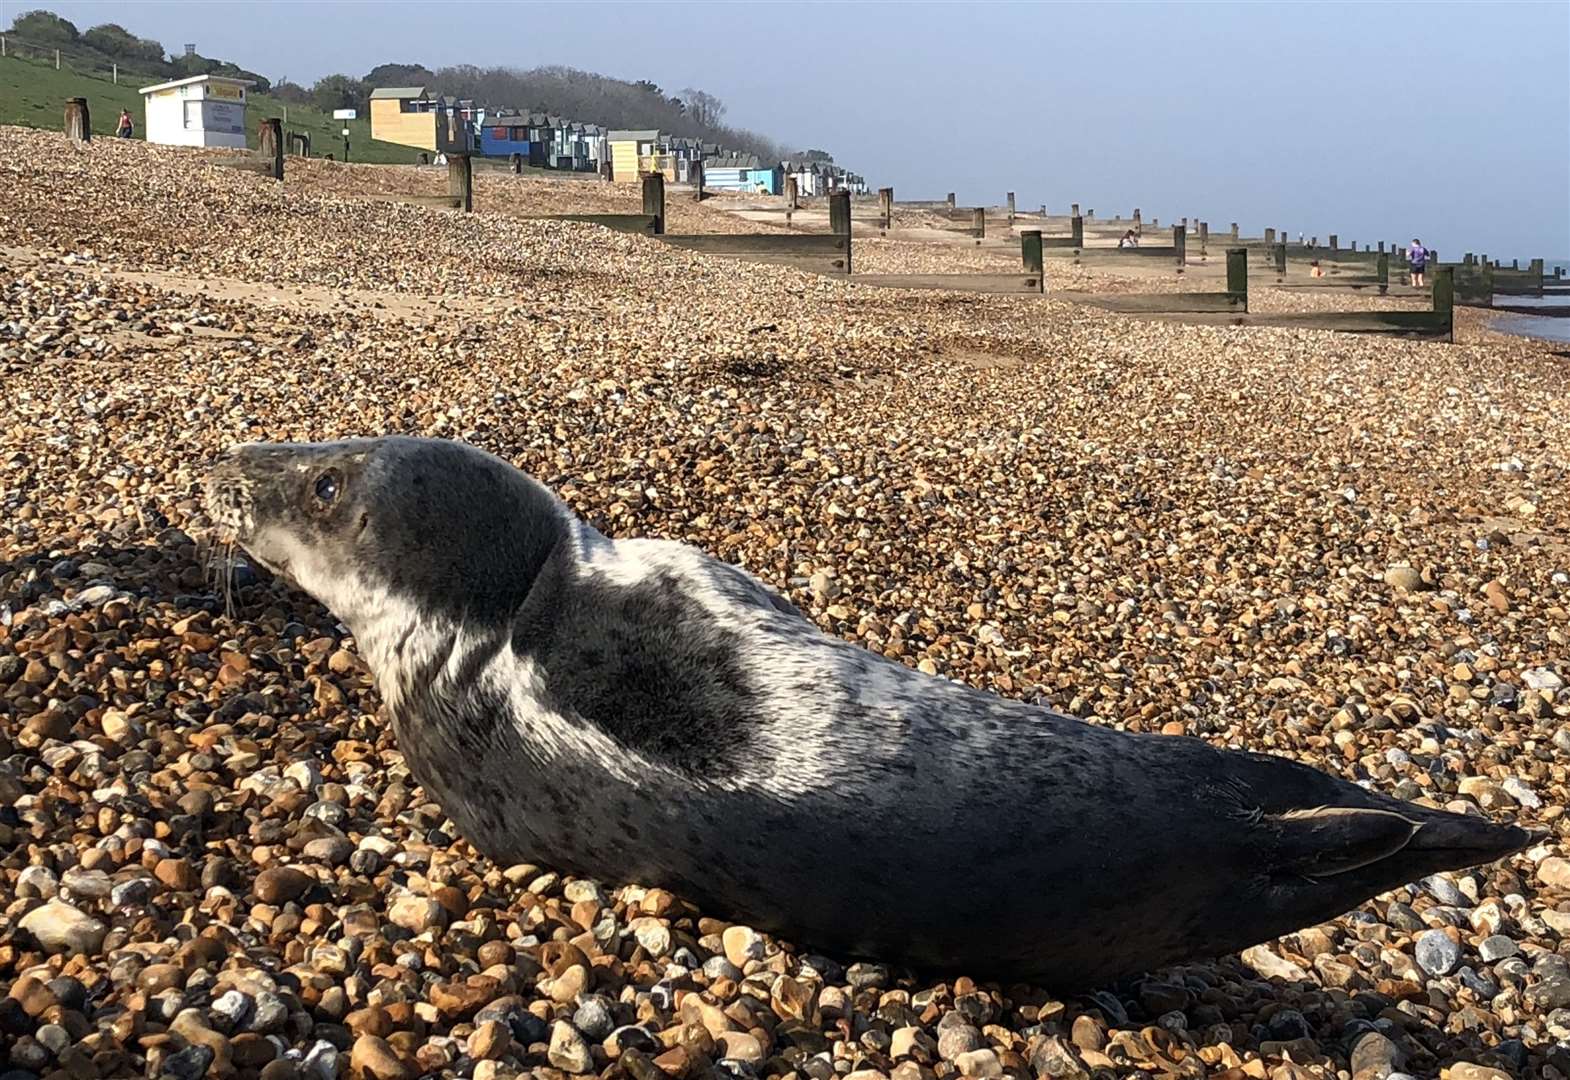 The seal was found on Tankerton beach. Picture: Mark Newby